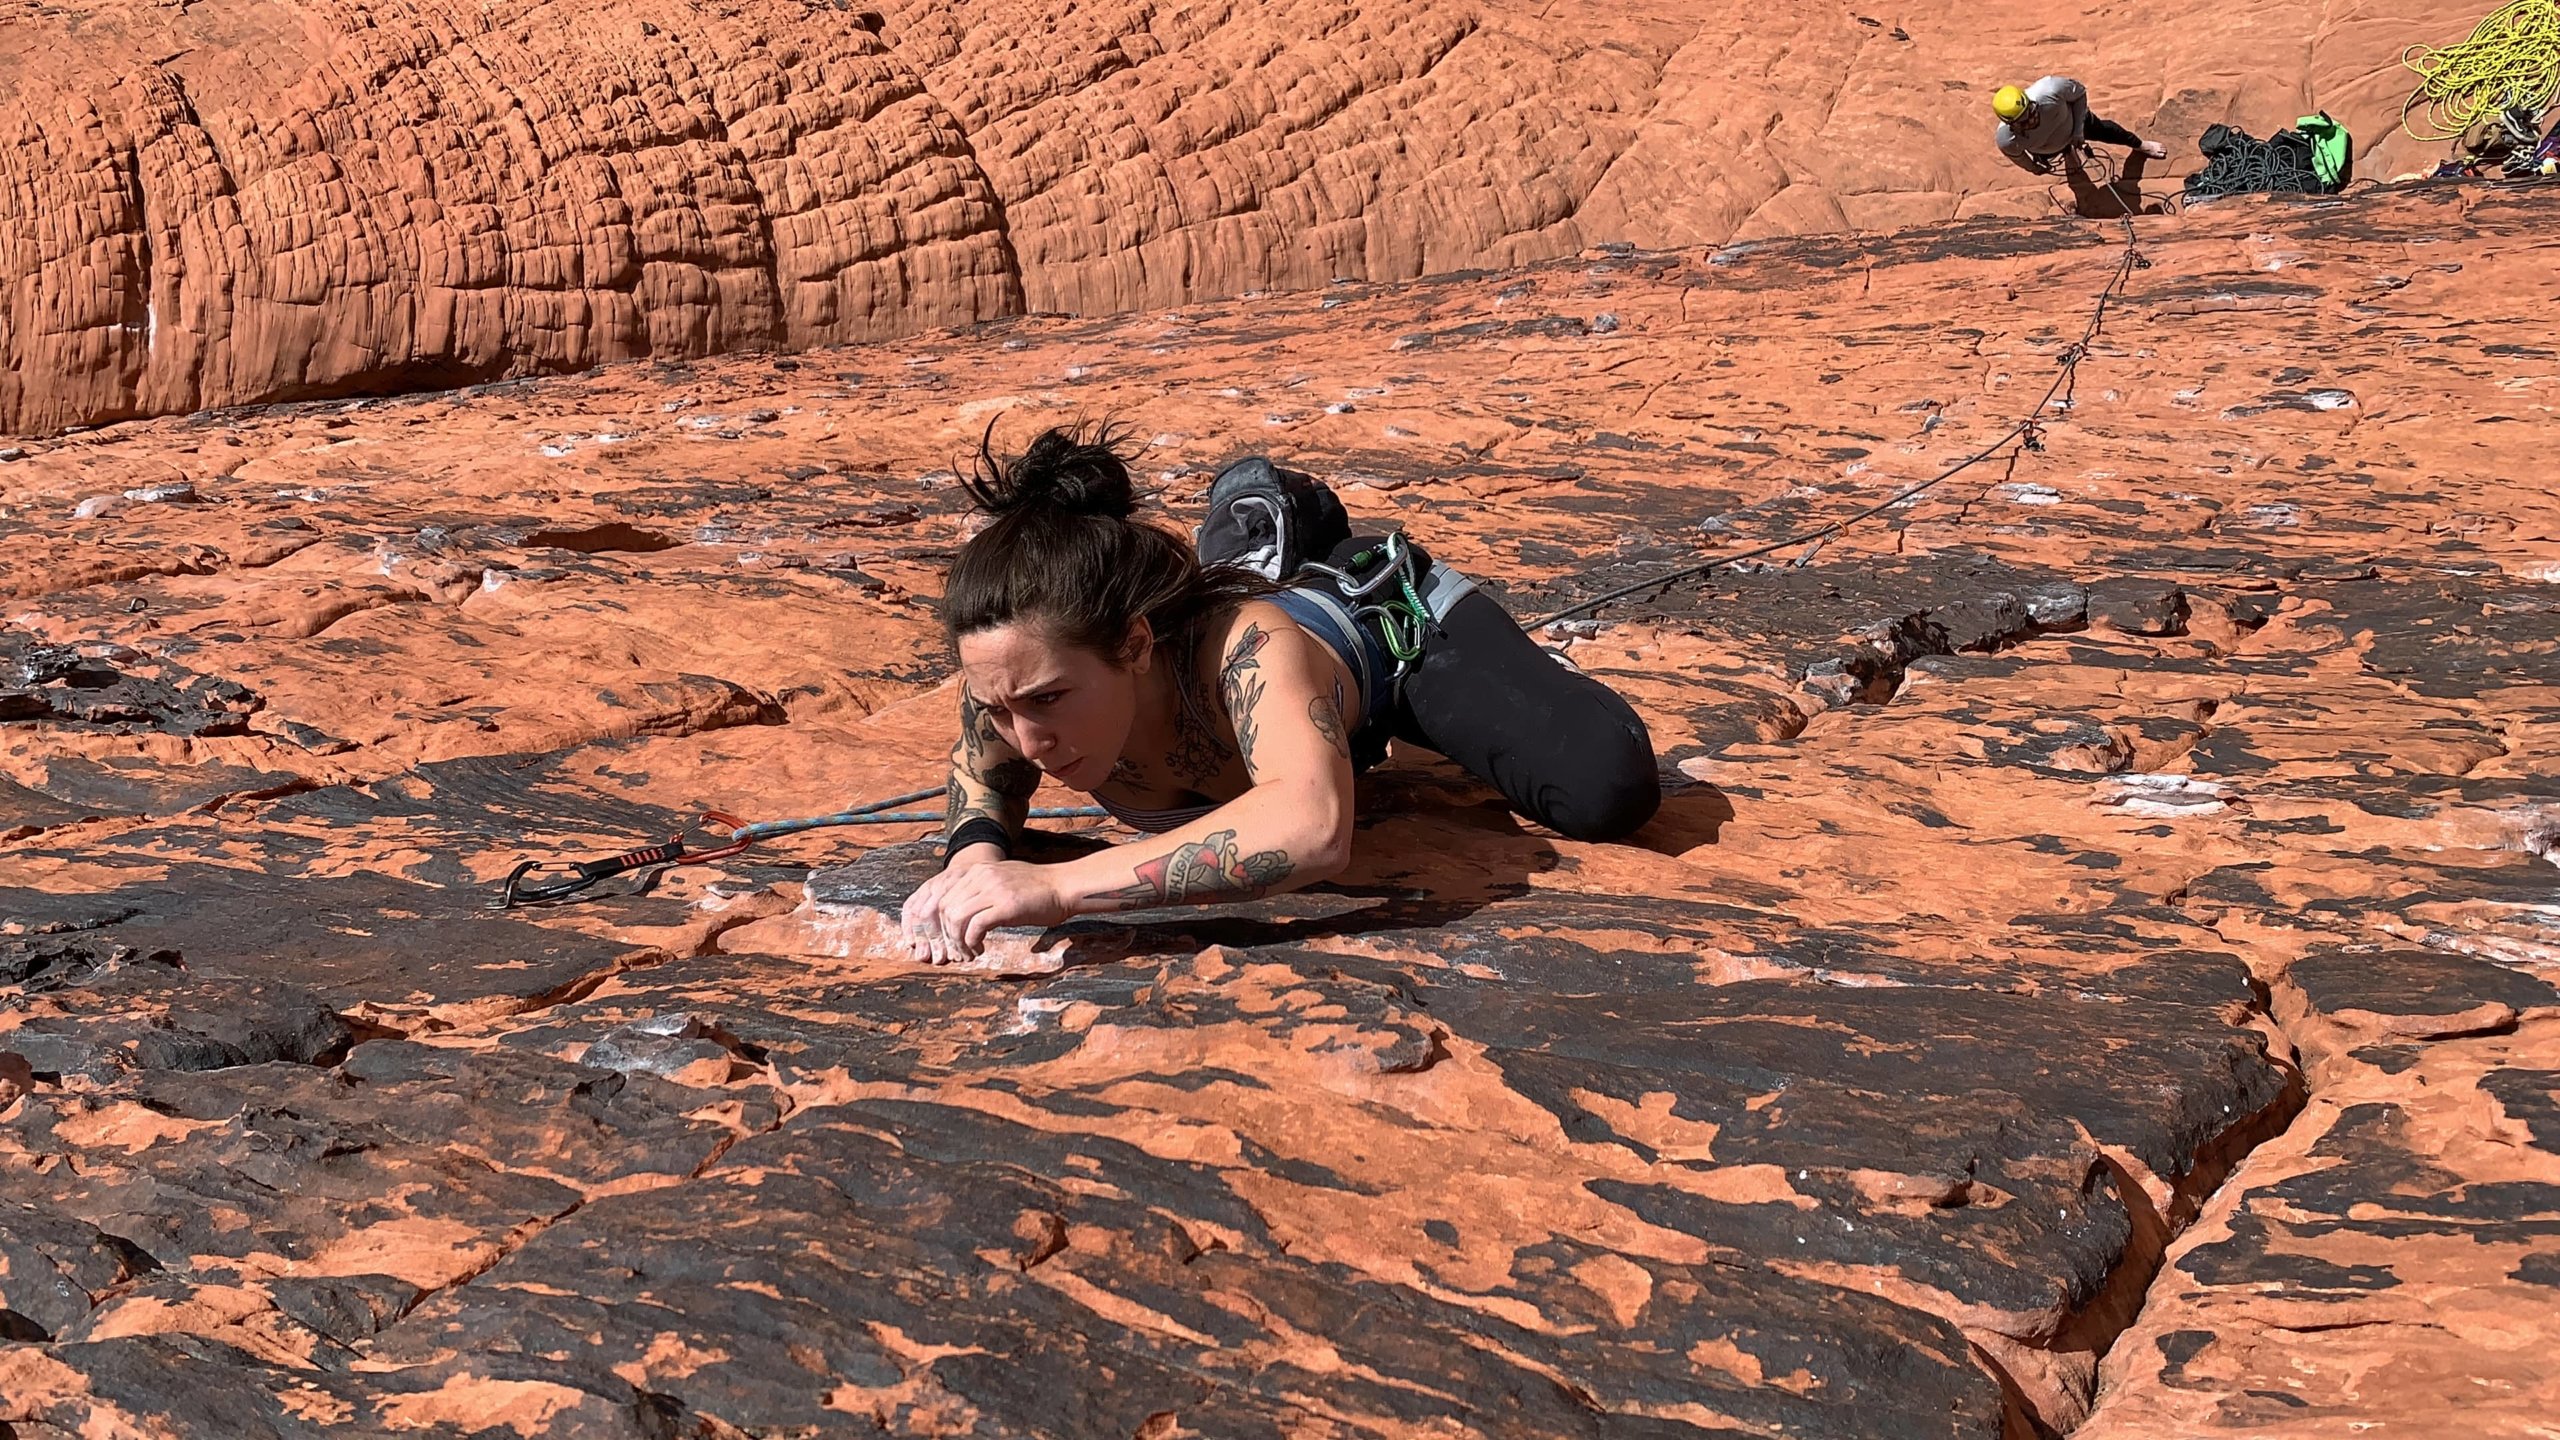 Ally Malone bouldering in Girlfriend Collective dress